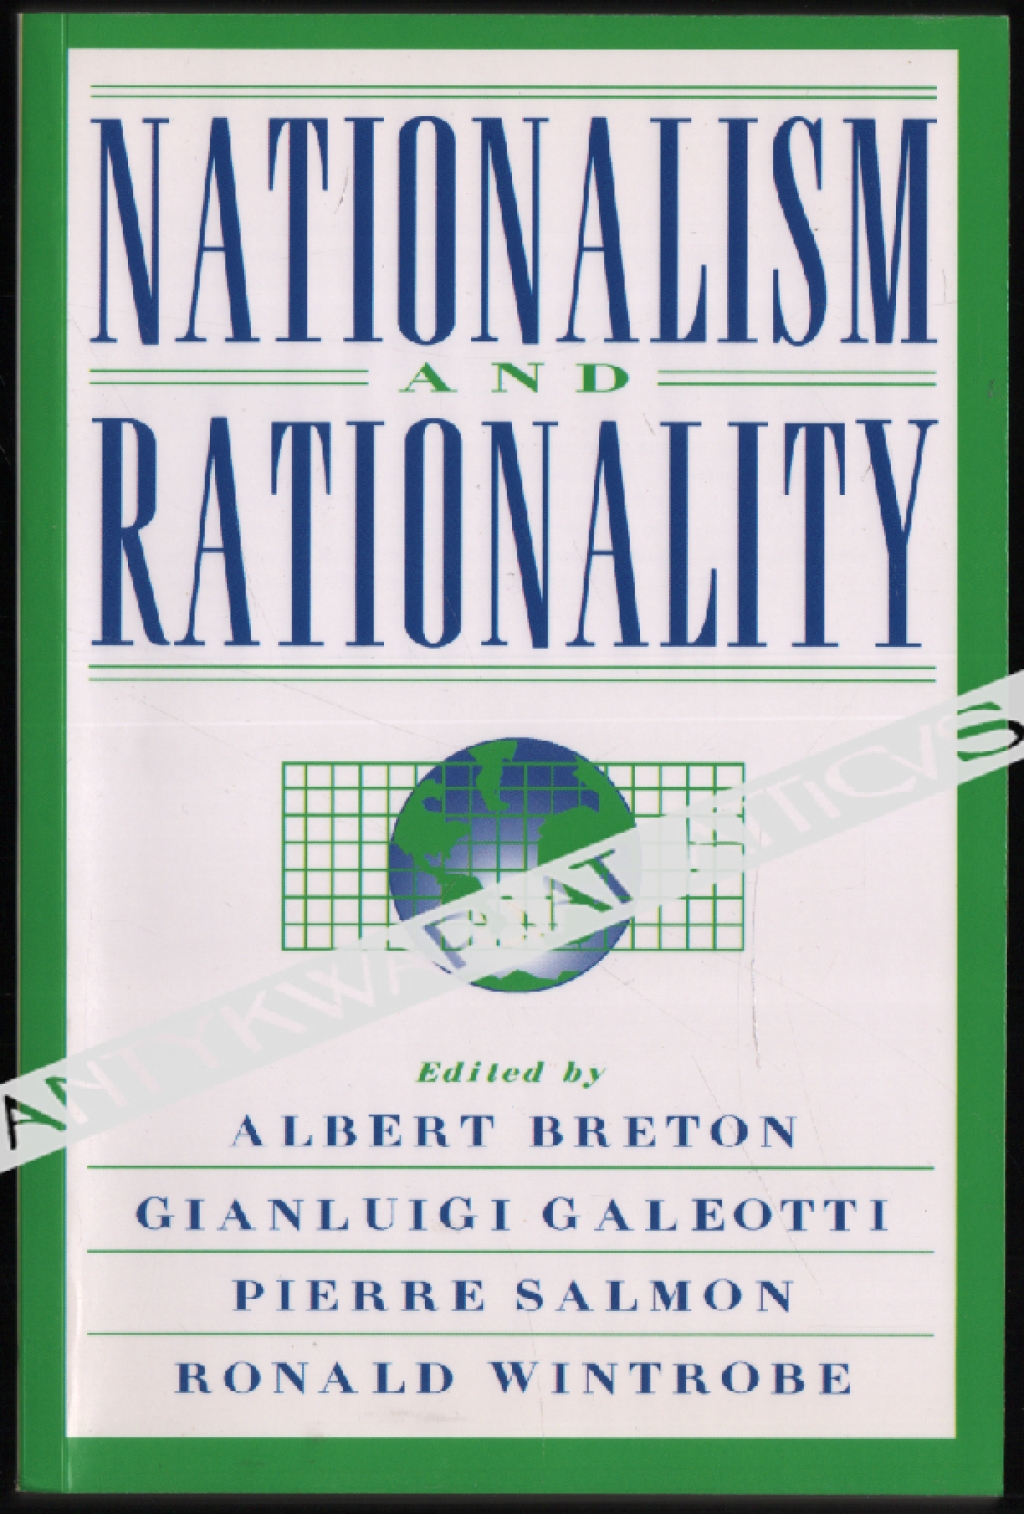 Nationalizm and Rationality